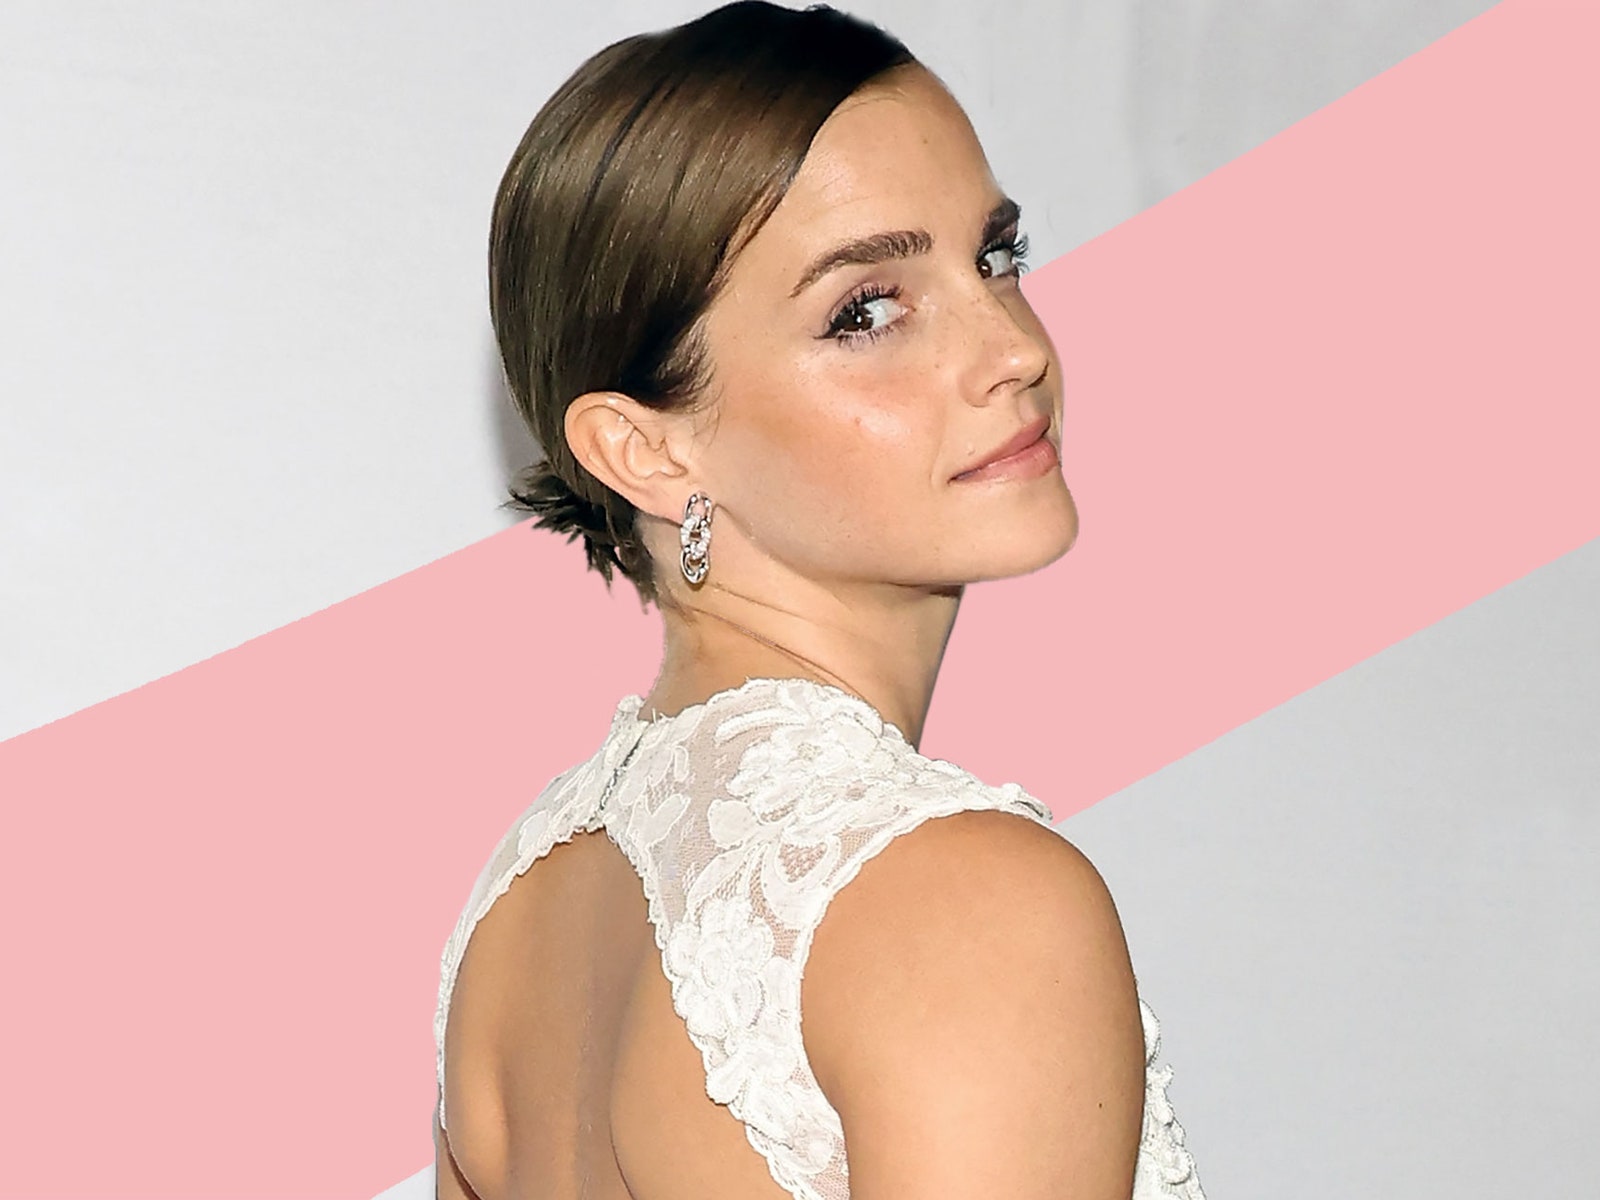 Emma Watson Wore a Gravity-Defying Dress, and the Jokes Are Hysterical